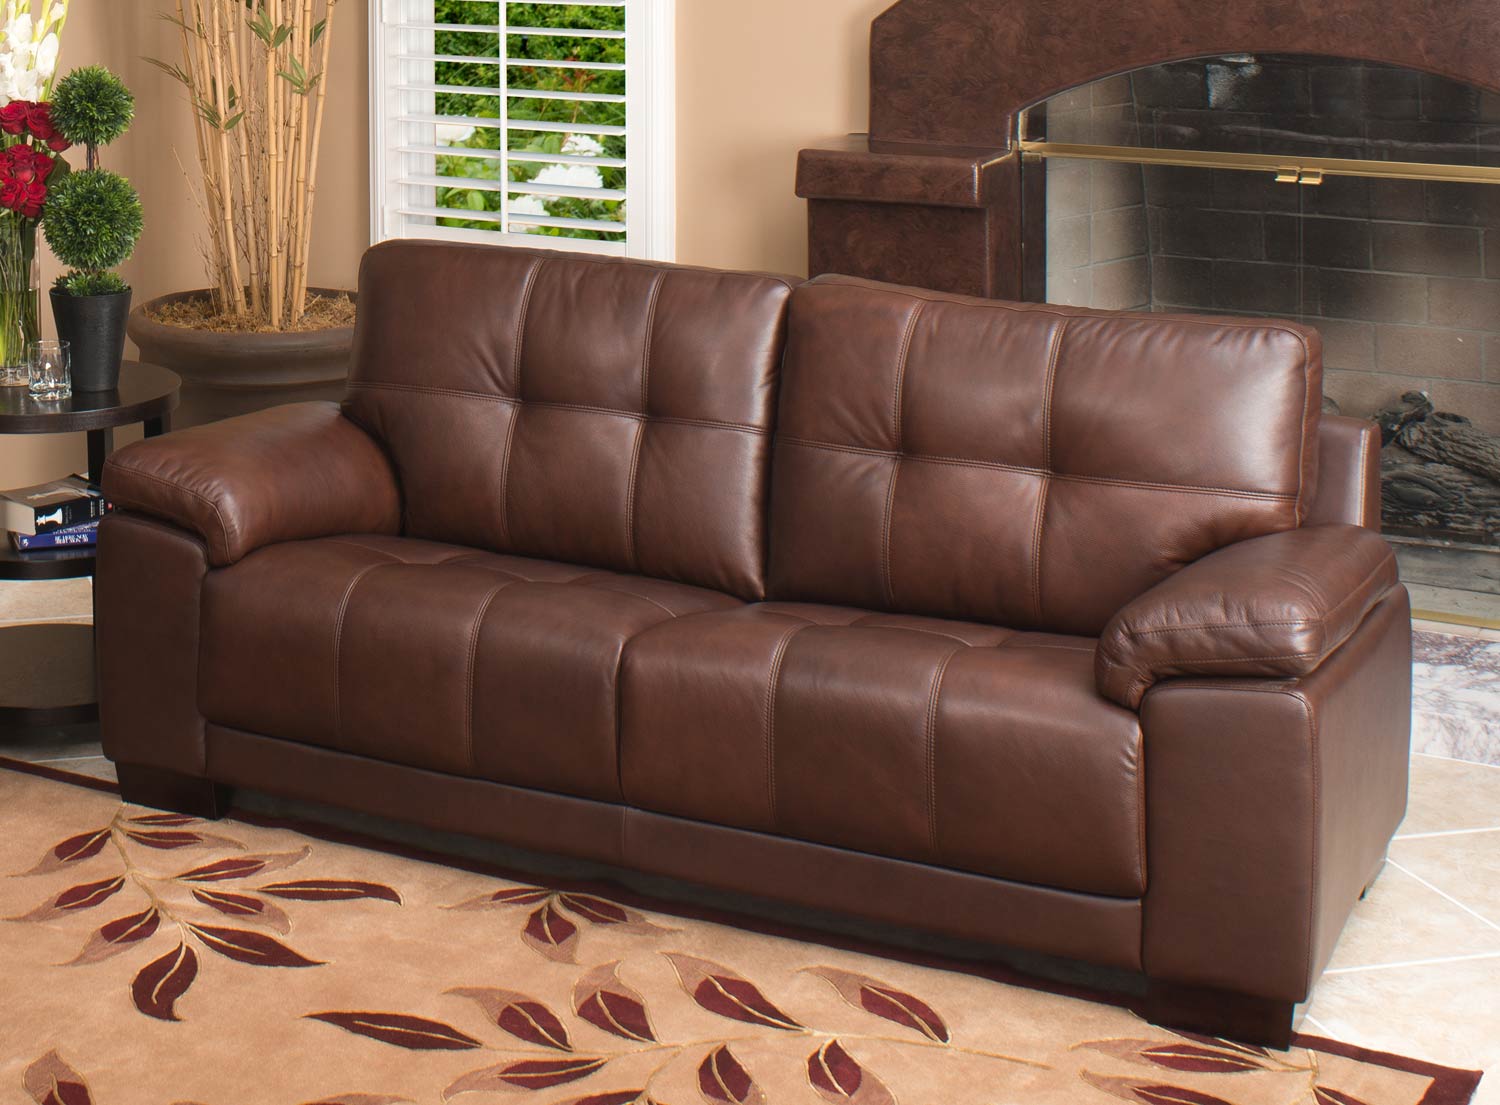 Abbyson Living Florence Two Tone Brown Leather Sofa